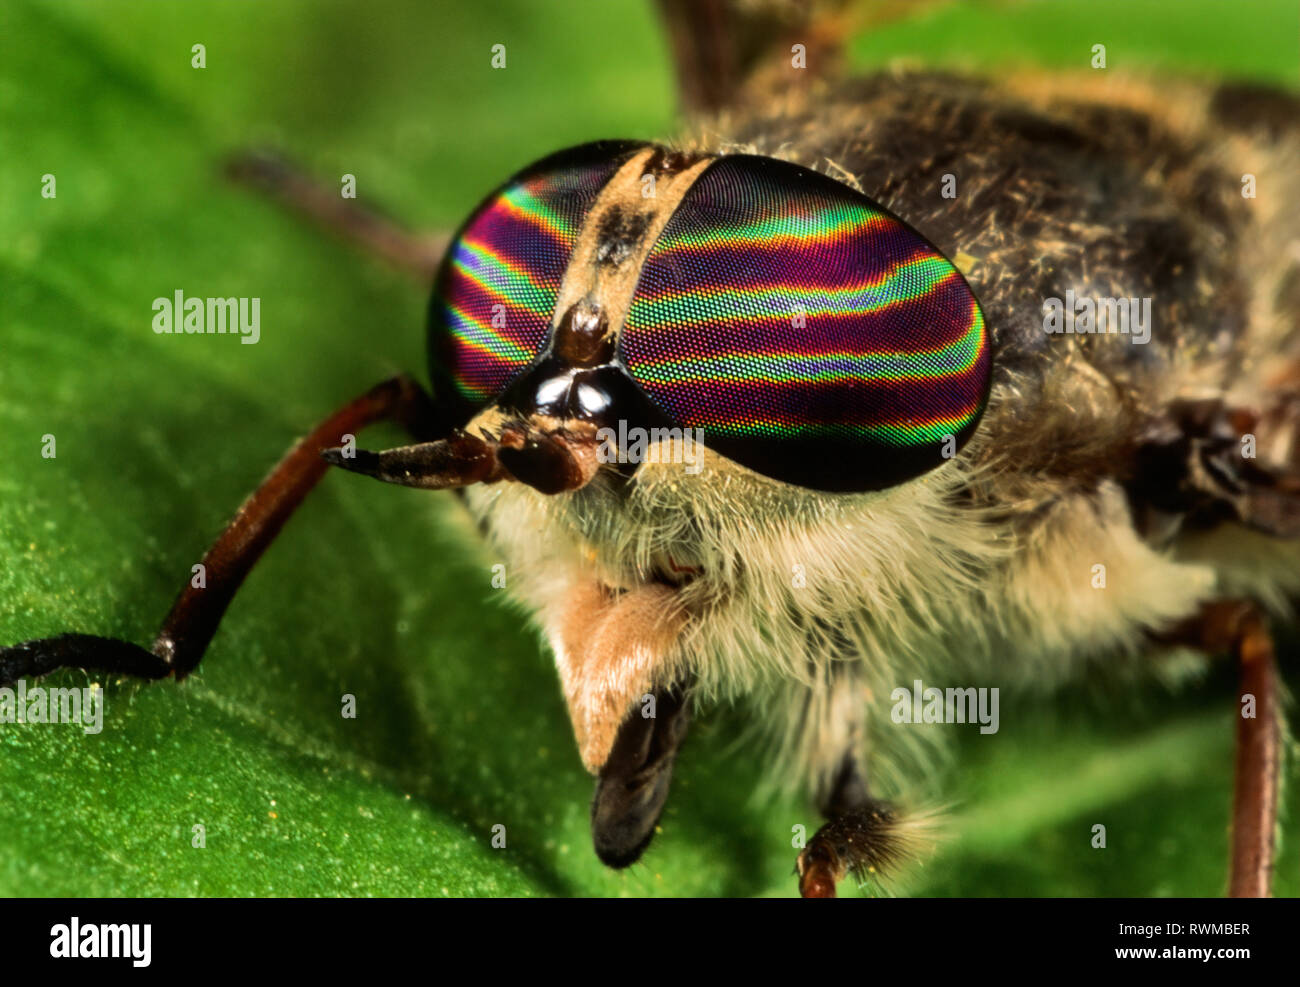 Iridescent colors shining from the facets of the compound eye of a horse fly. Stock Photo